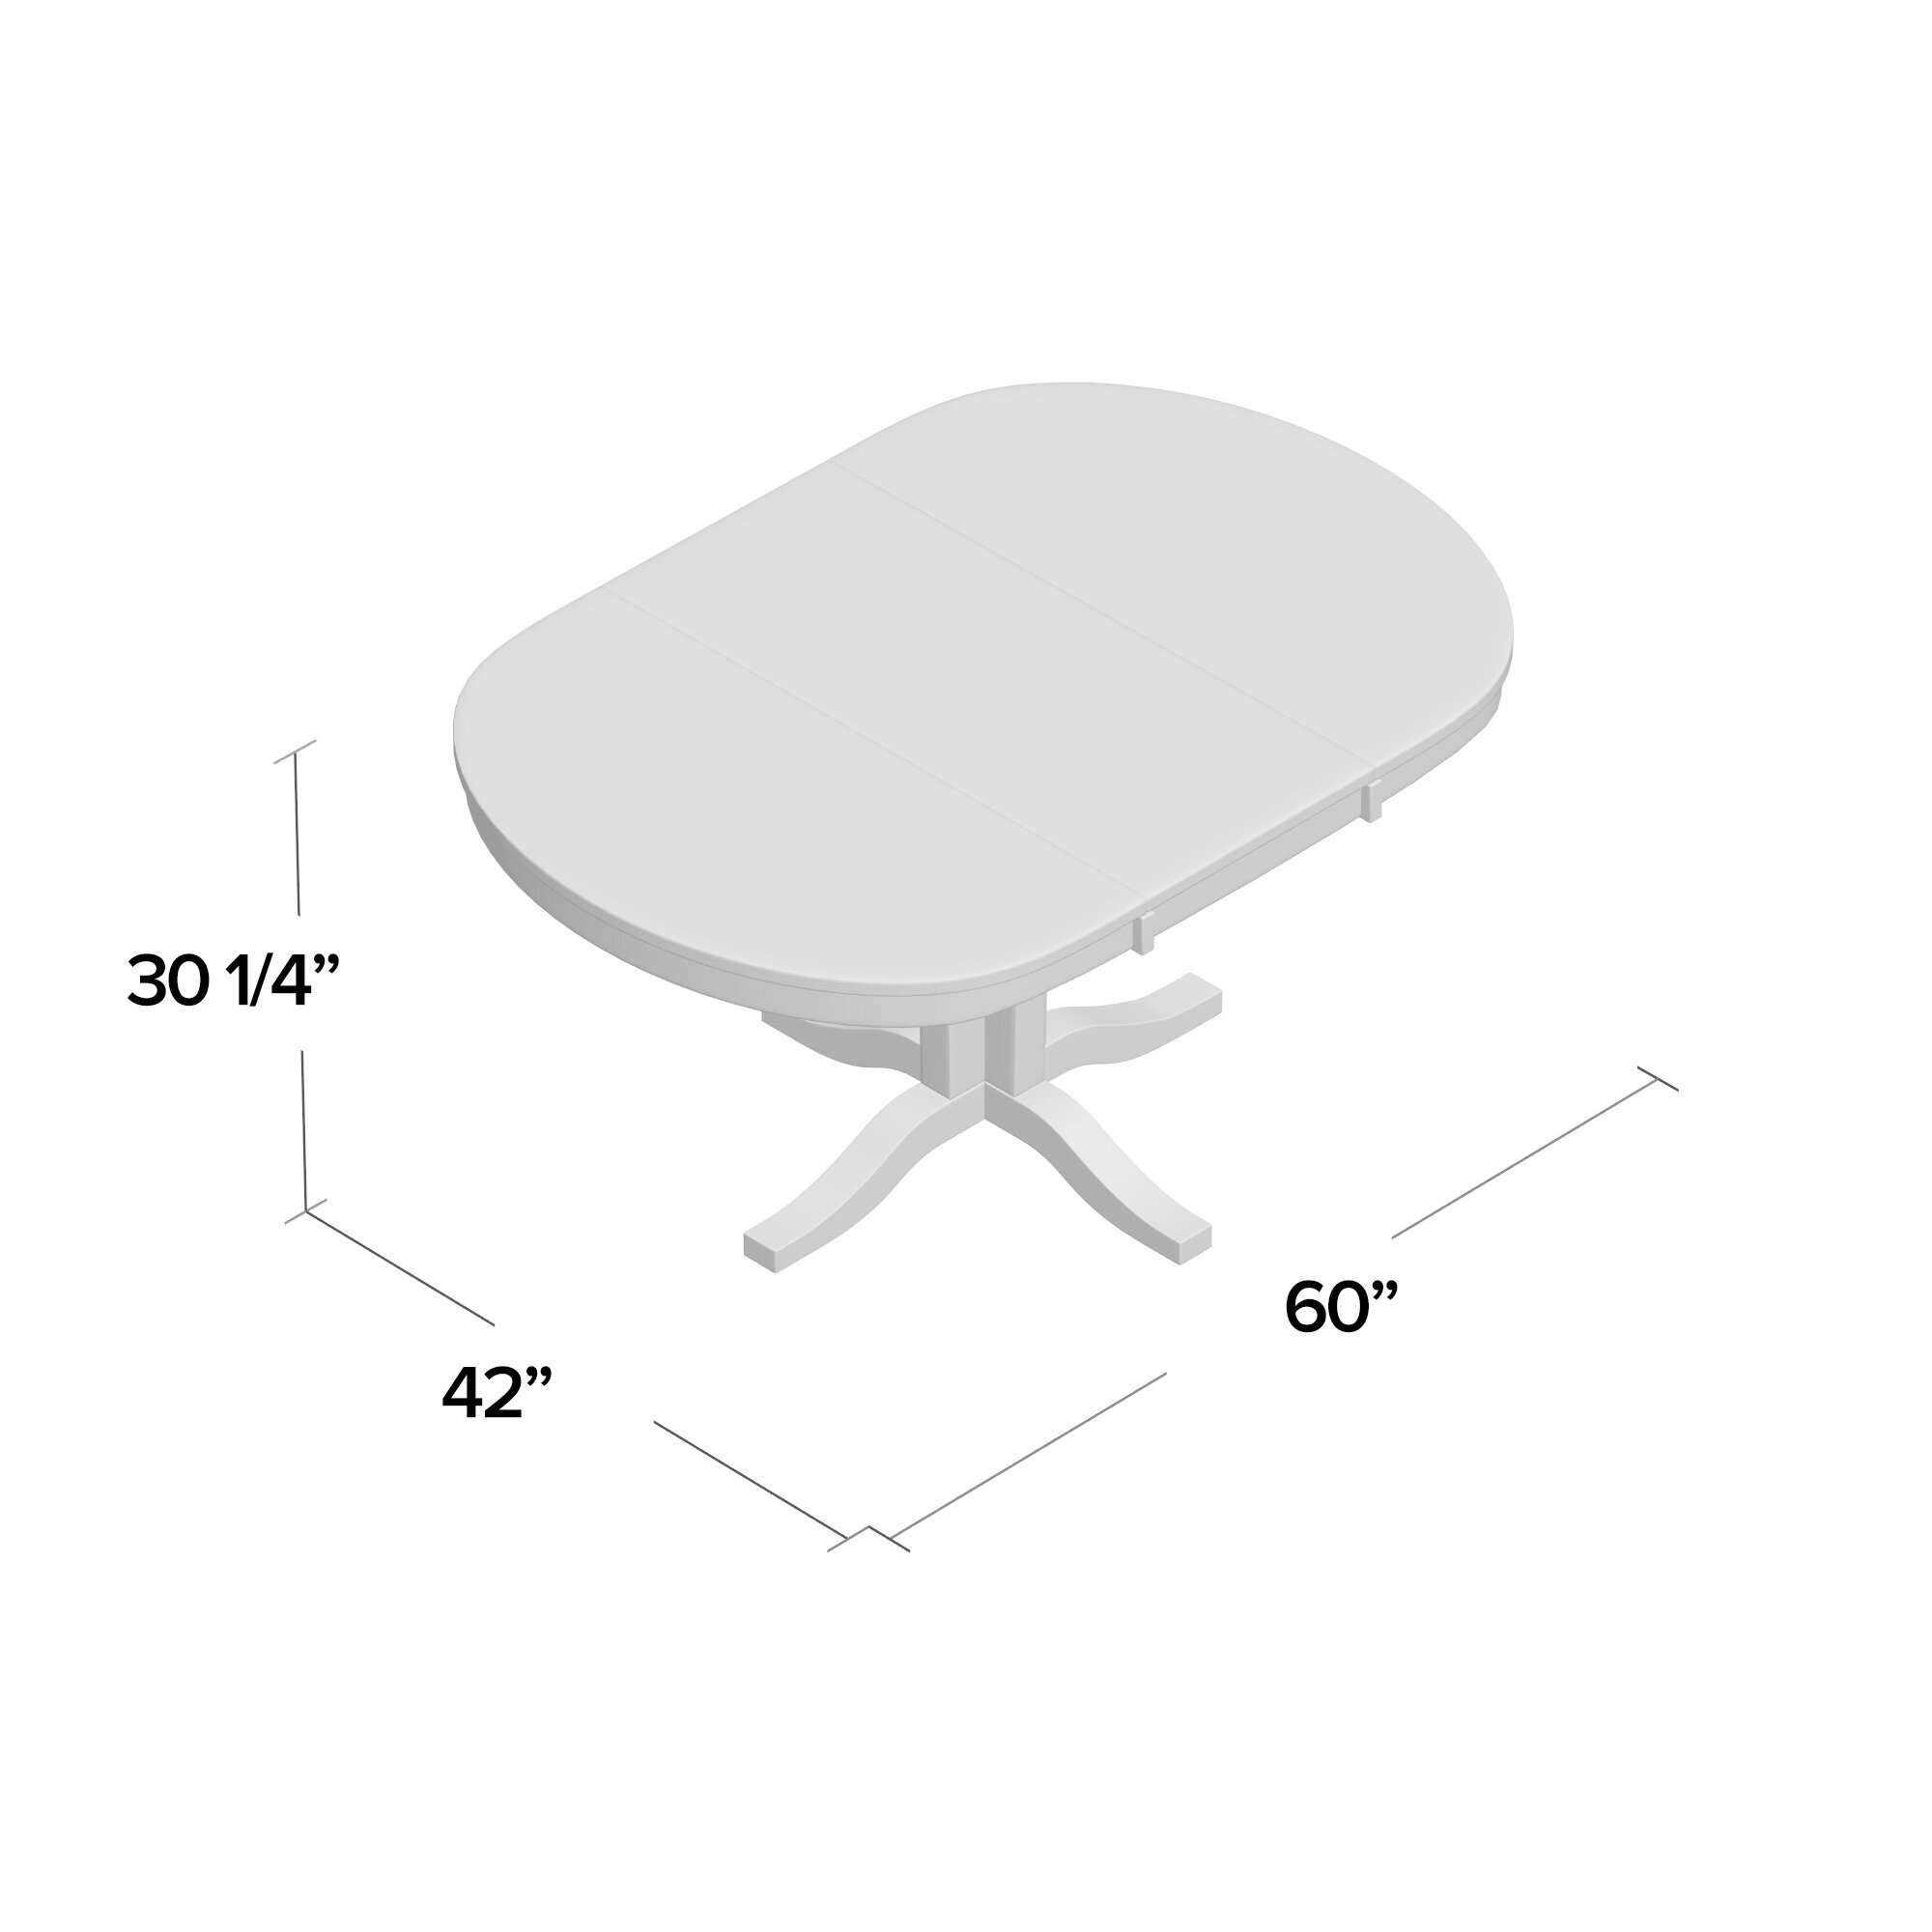 Marriott Pedestal Extendable Dining Table - Image 2